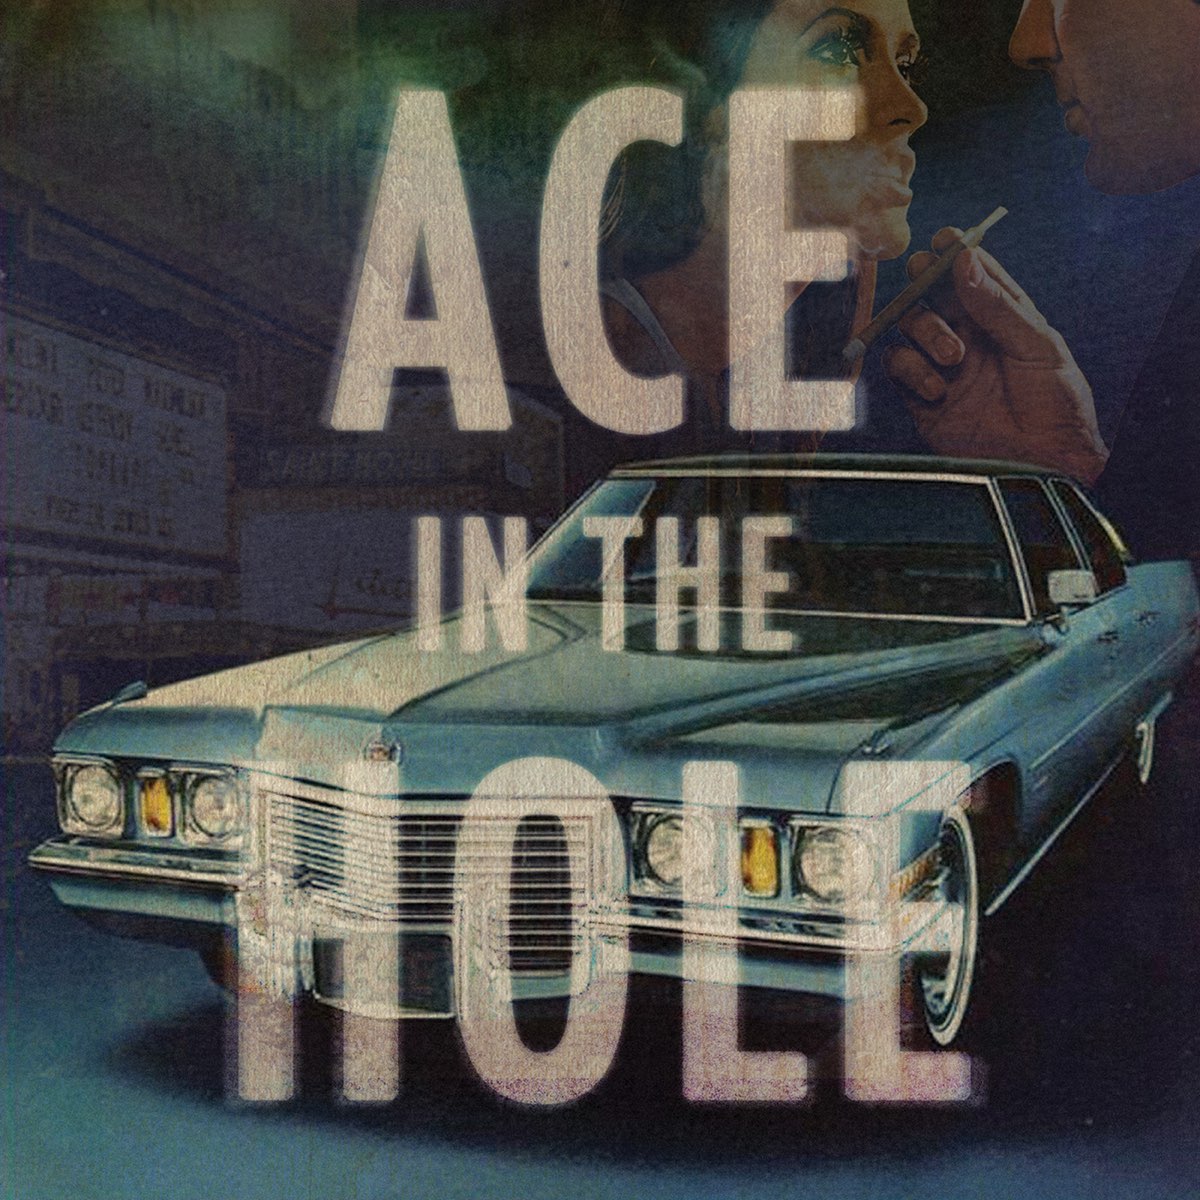 THE ACE IN THE HOLE